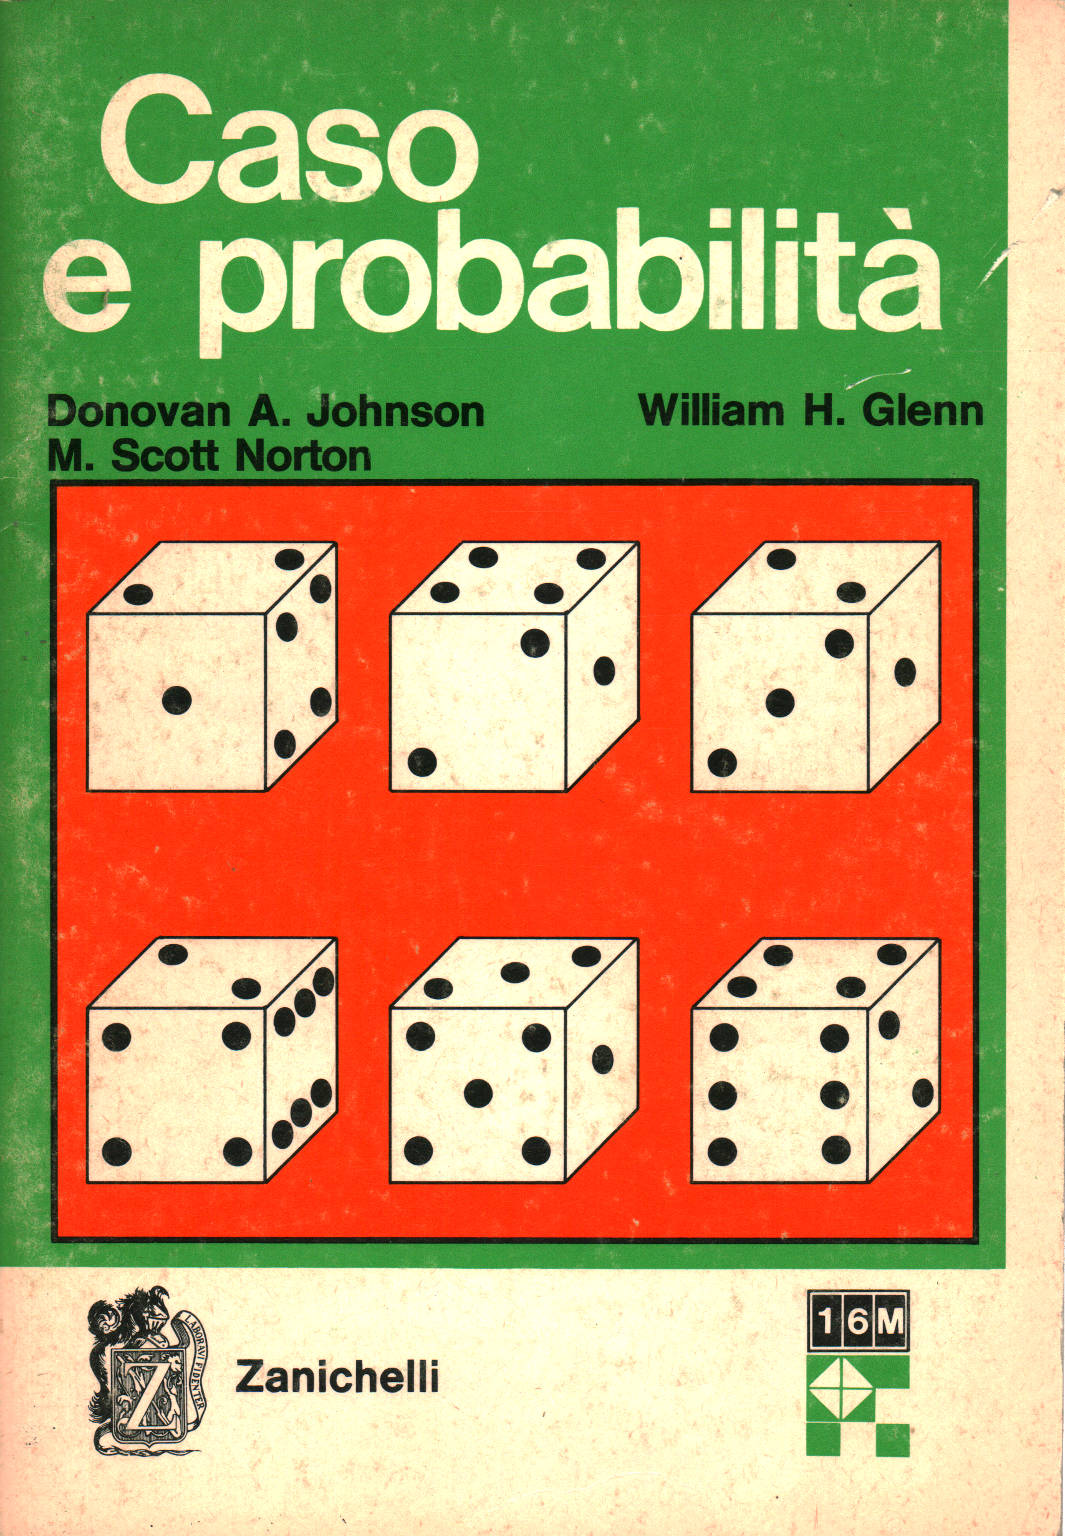 Chance and probability